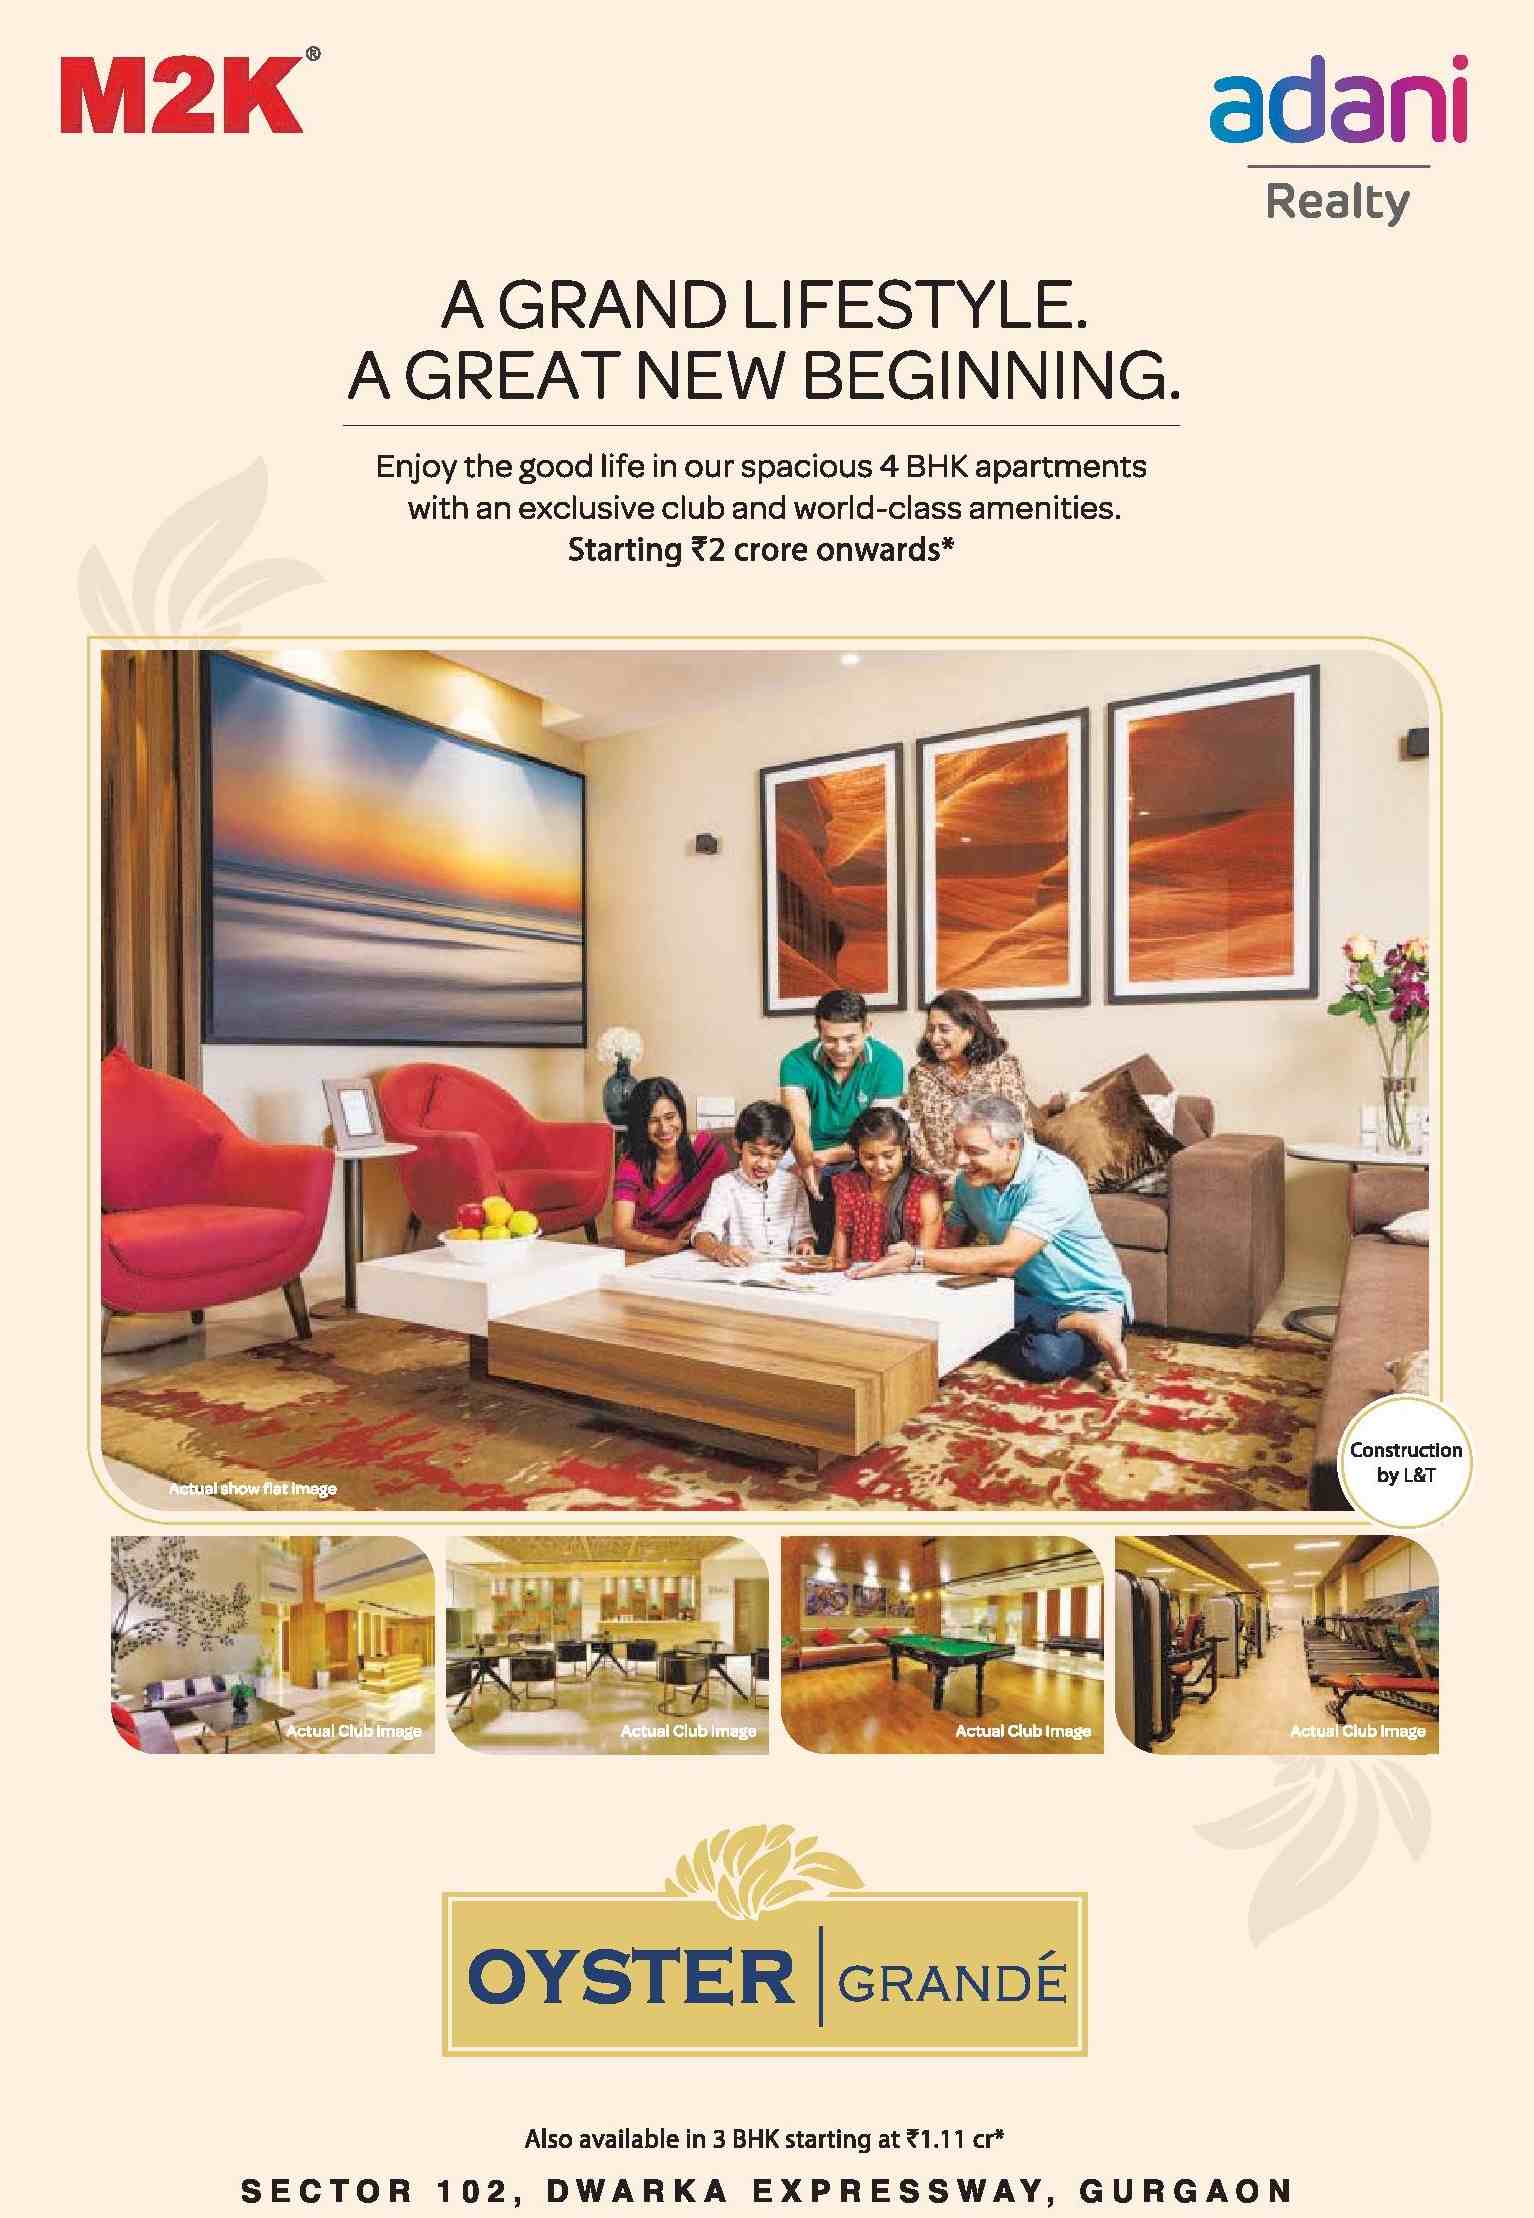 Enjoy good life with exclusive club & world-class amenities at Adani M2K Oyster Grande in Gurgaon